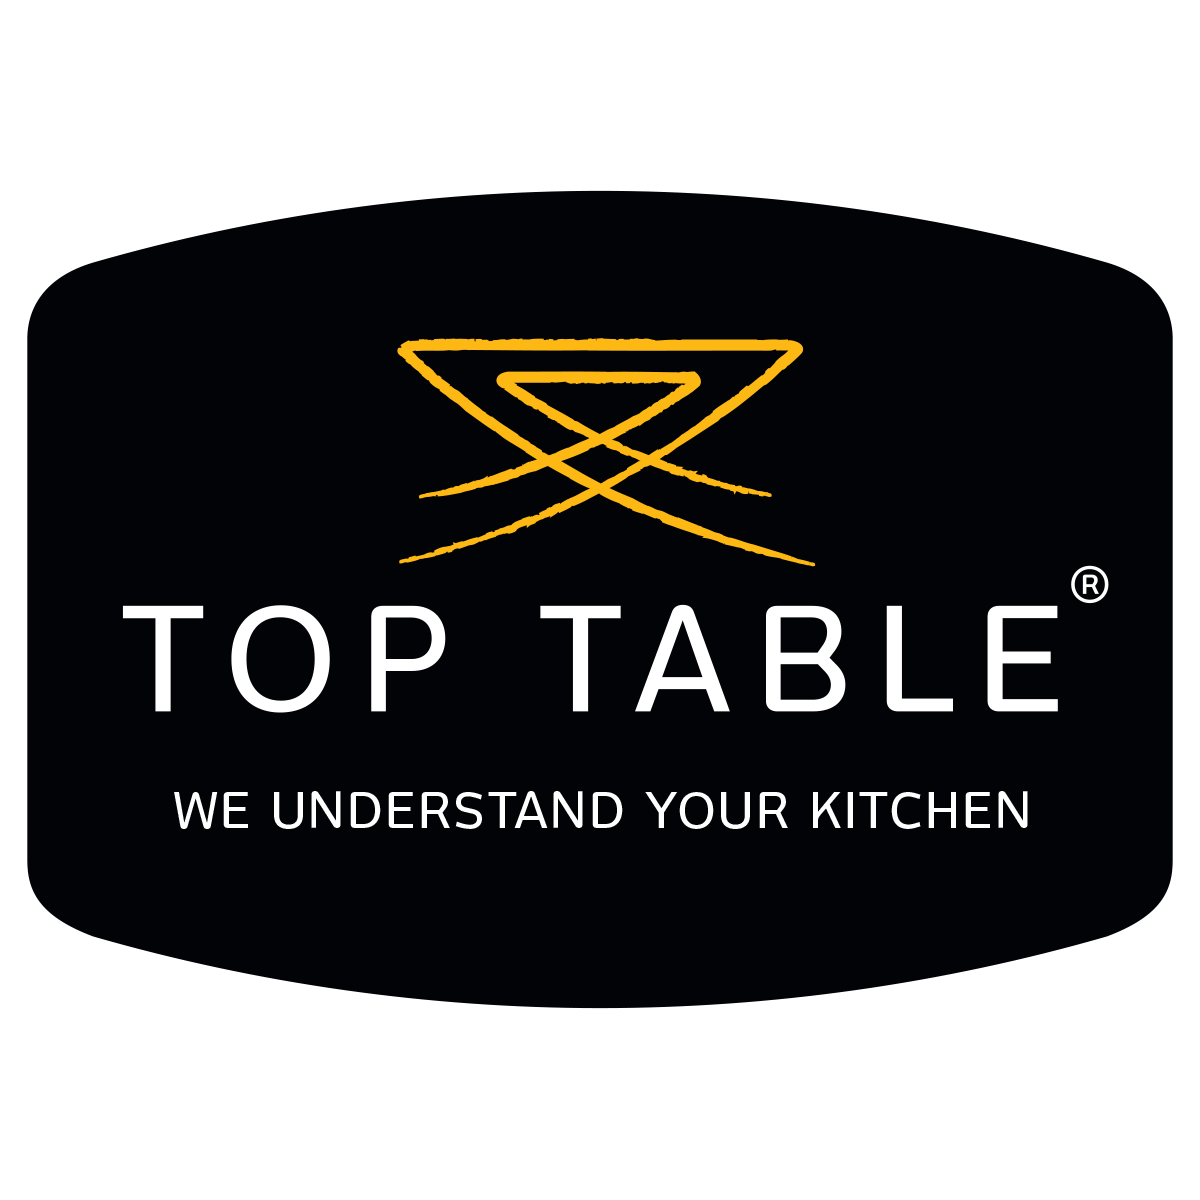 TOP TABLE